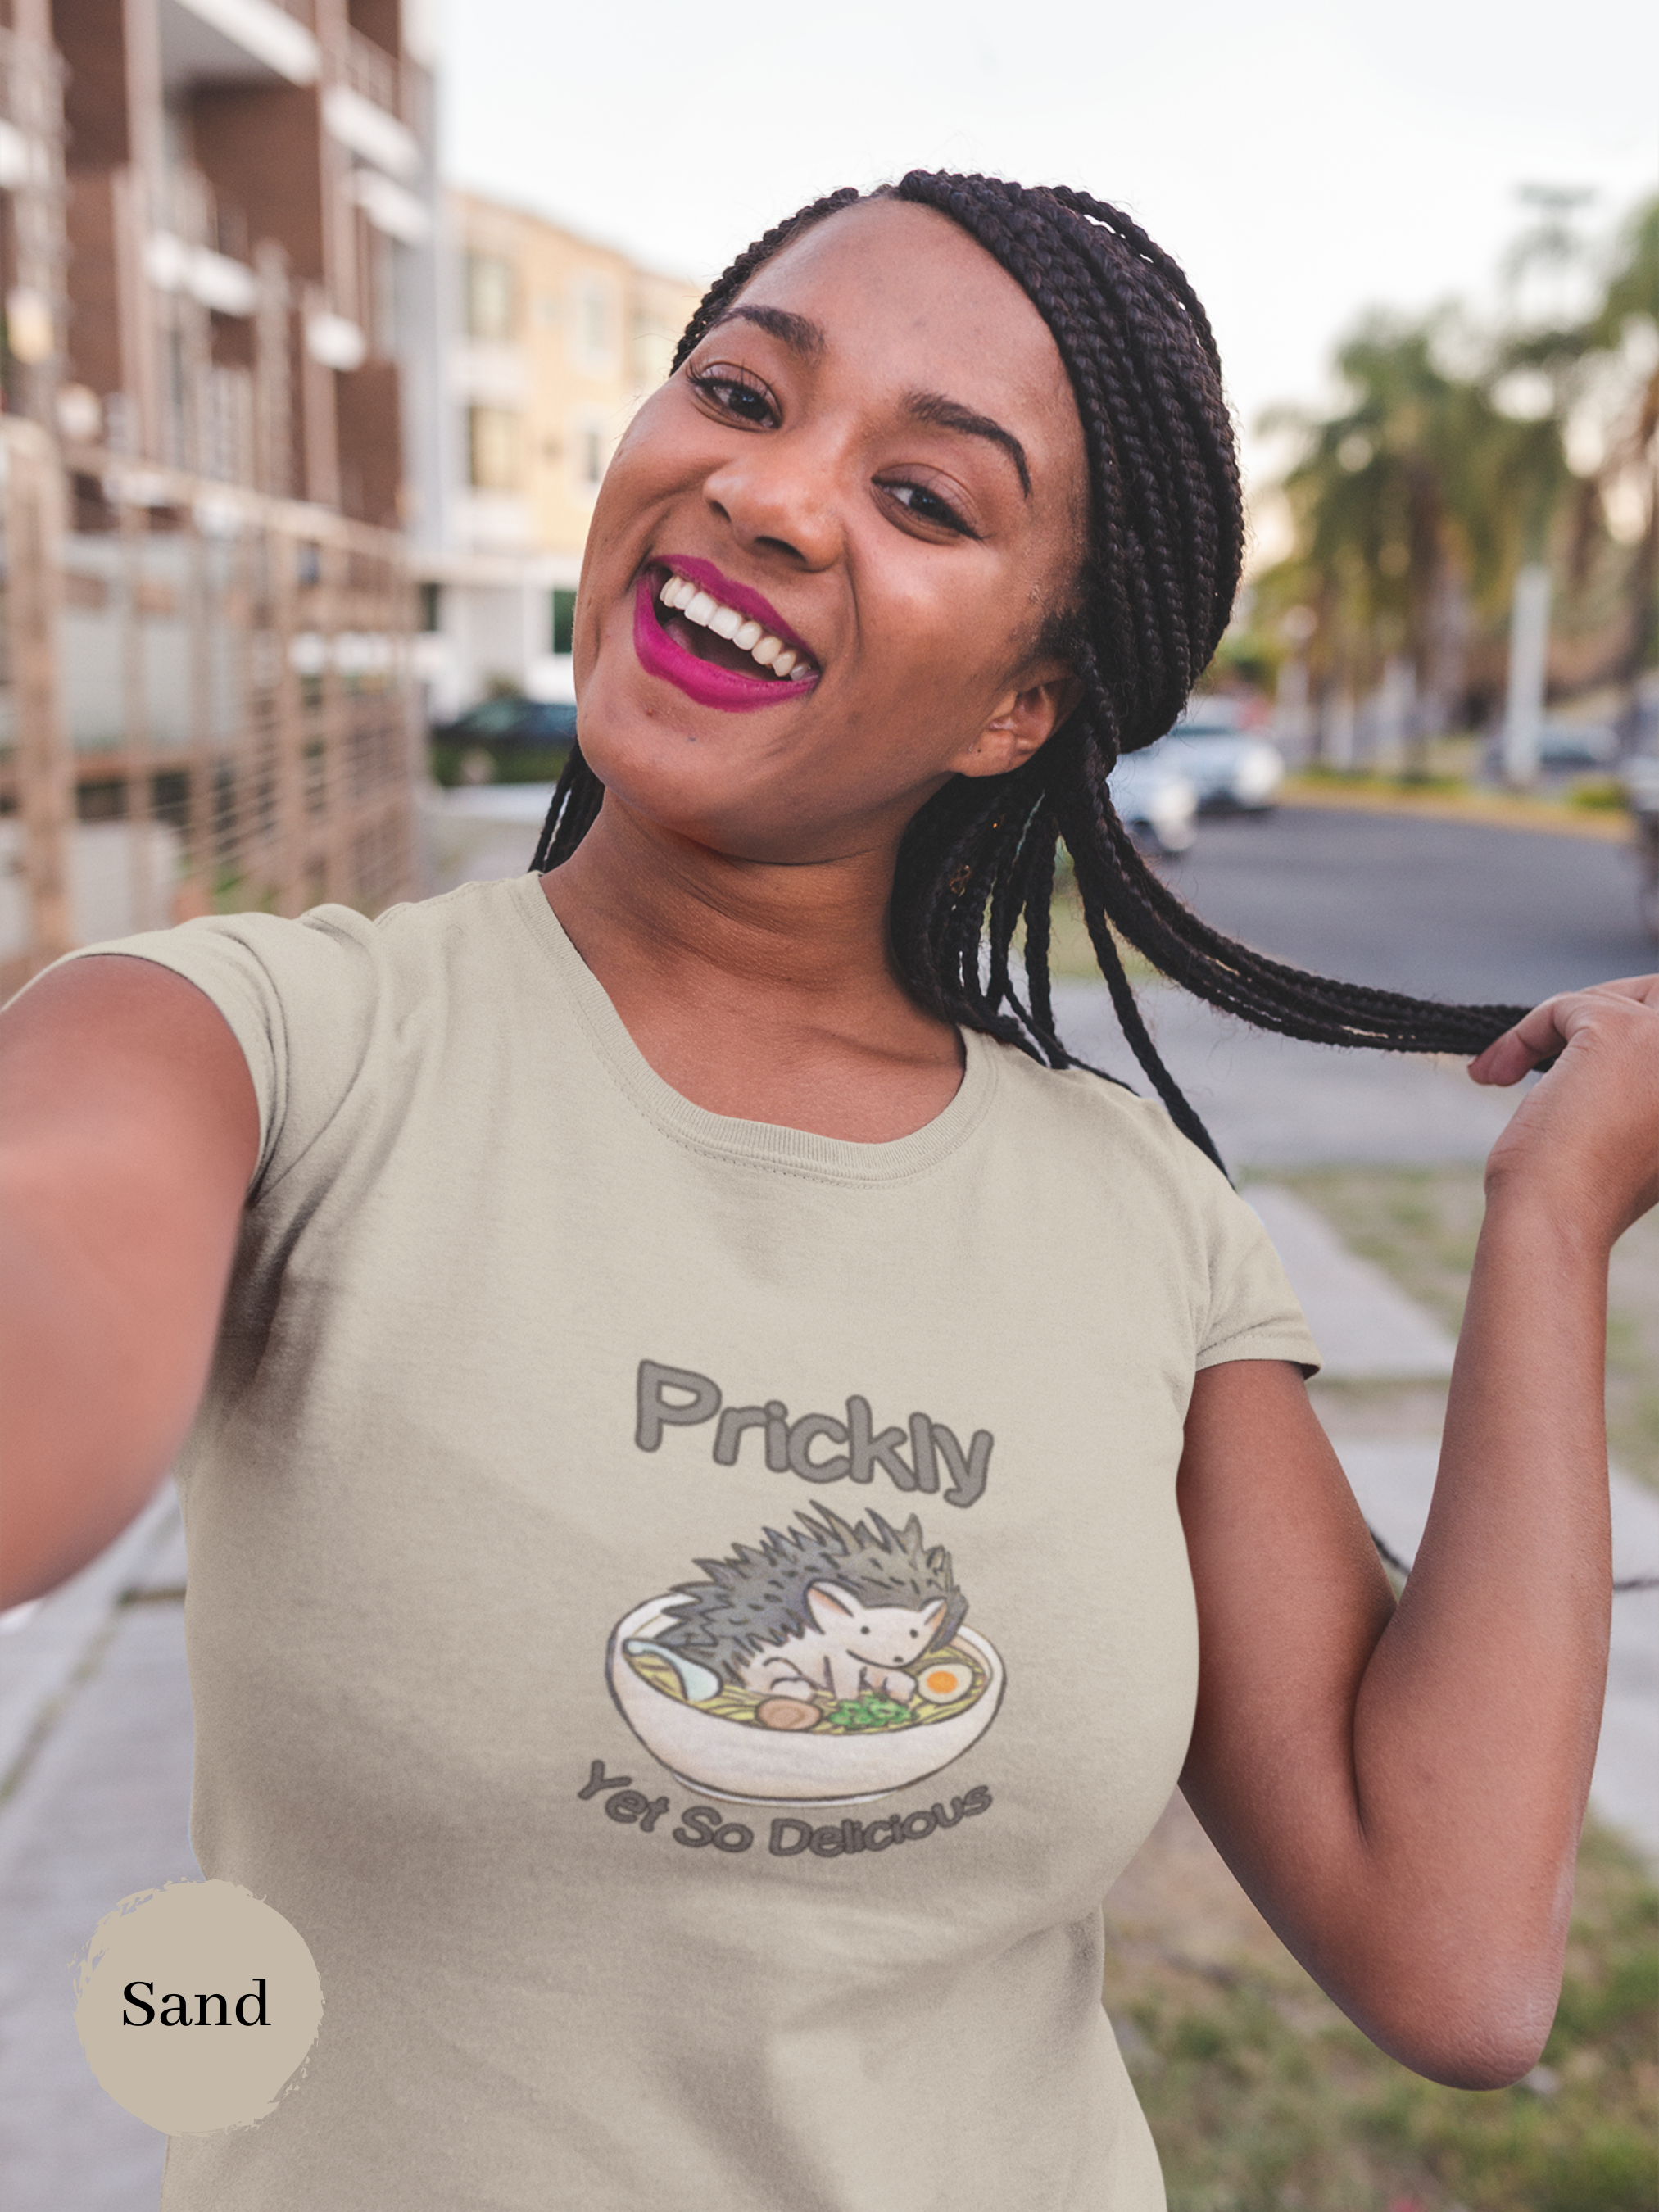 Ramen T-shirt with Prickly Yet So Delicious Porcupine - Japanese Foodie Shirt with Ramen Art